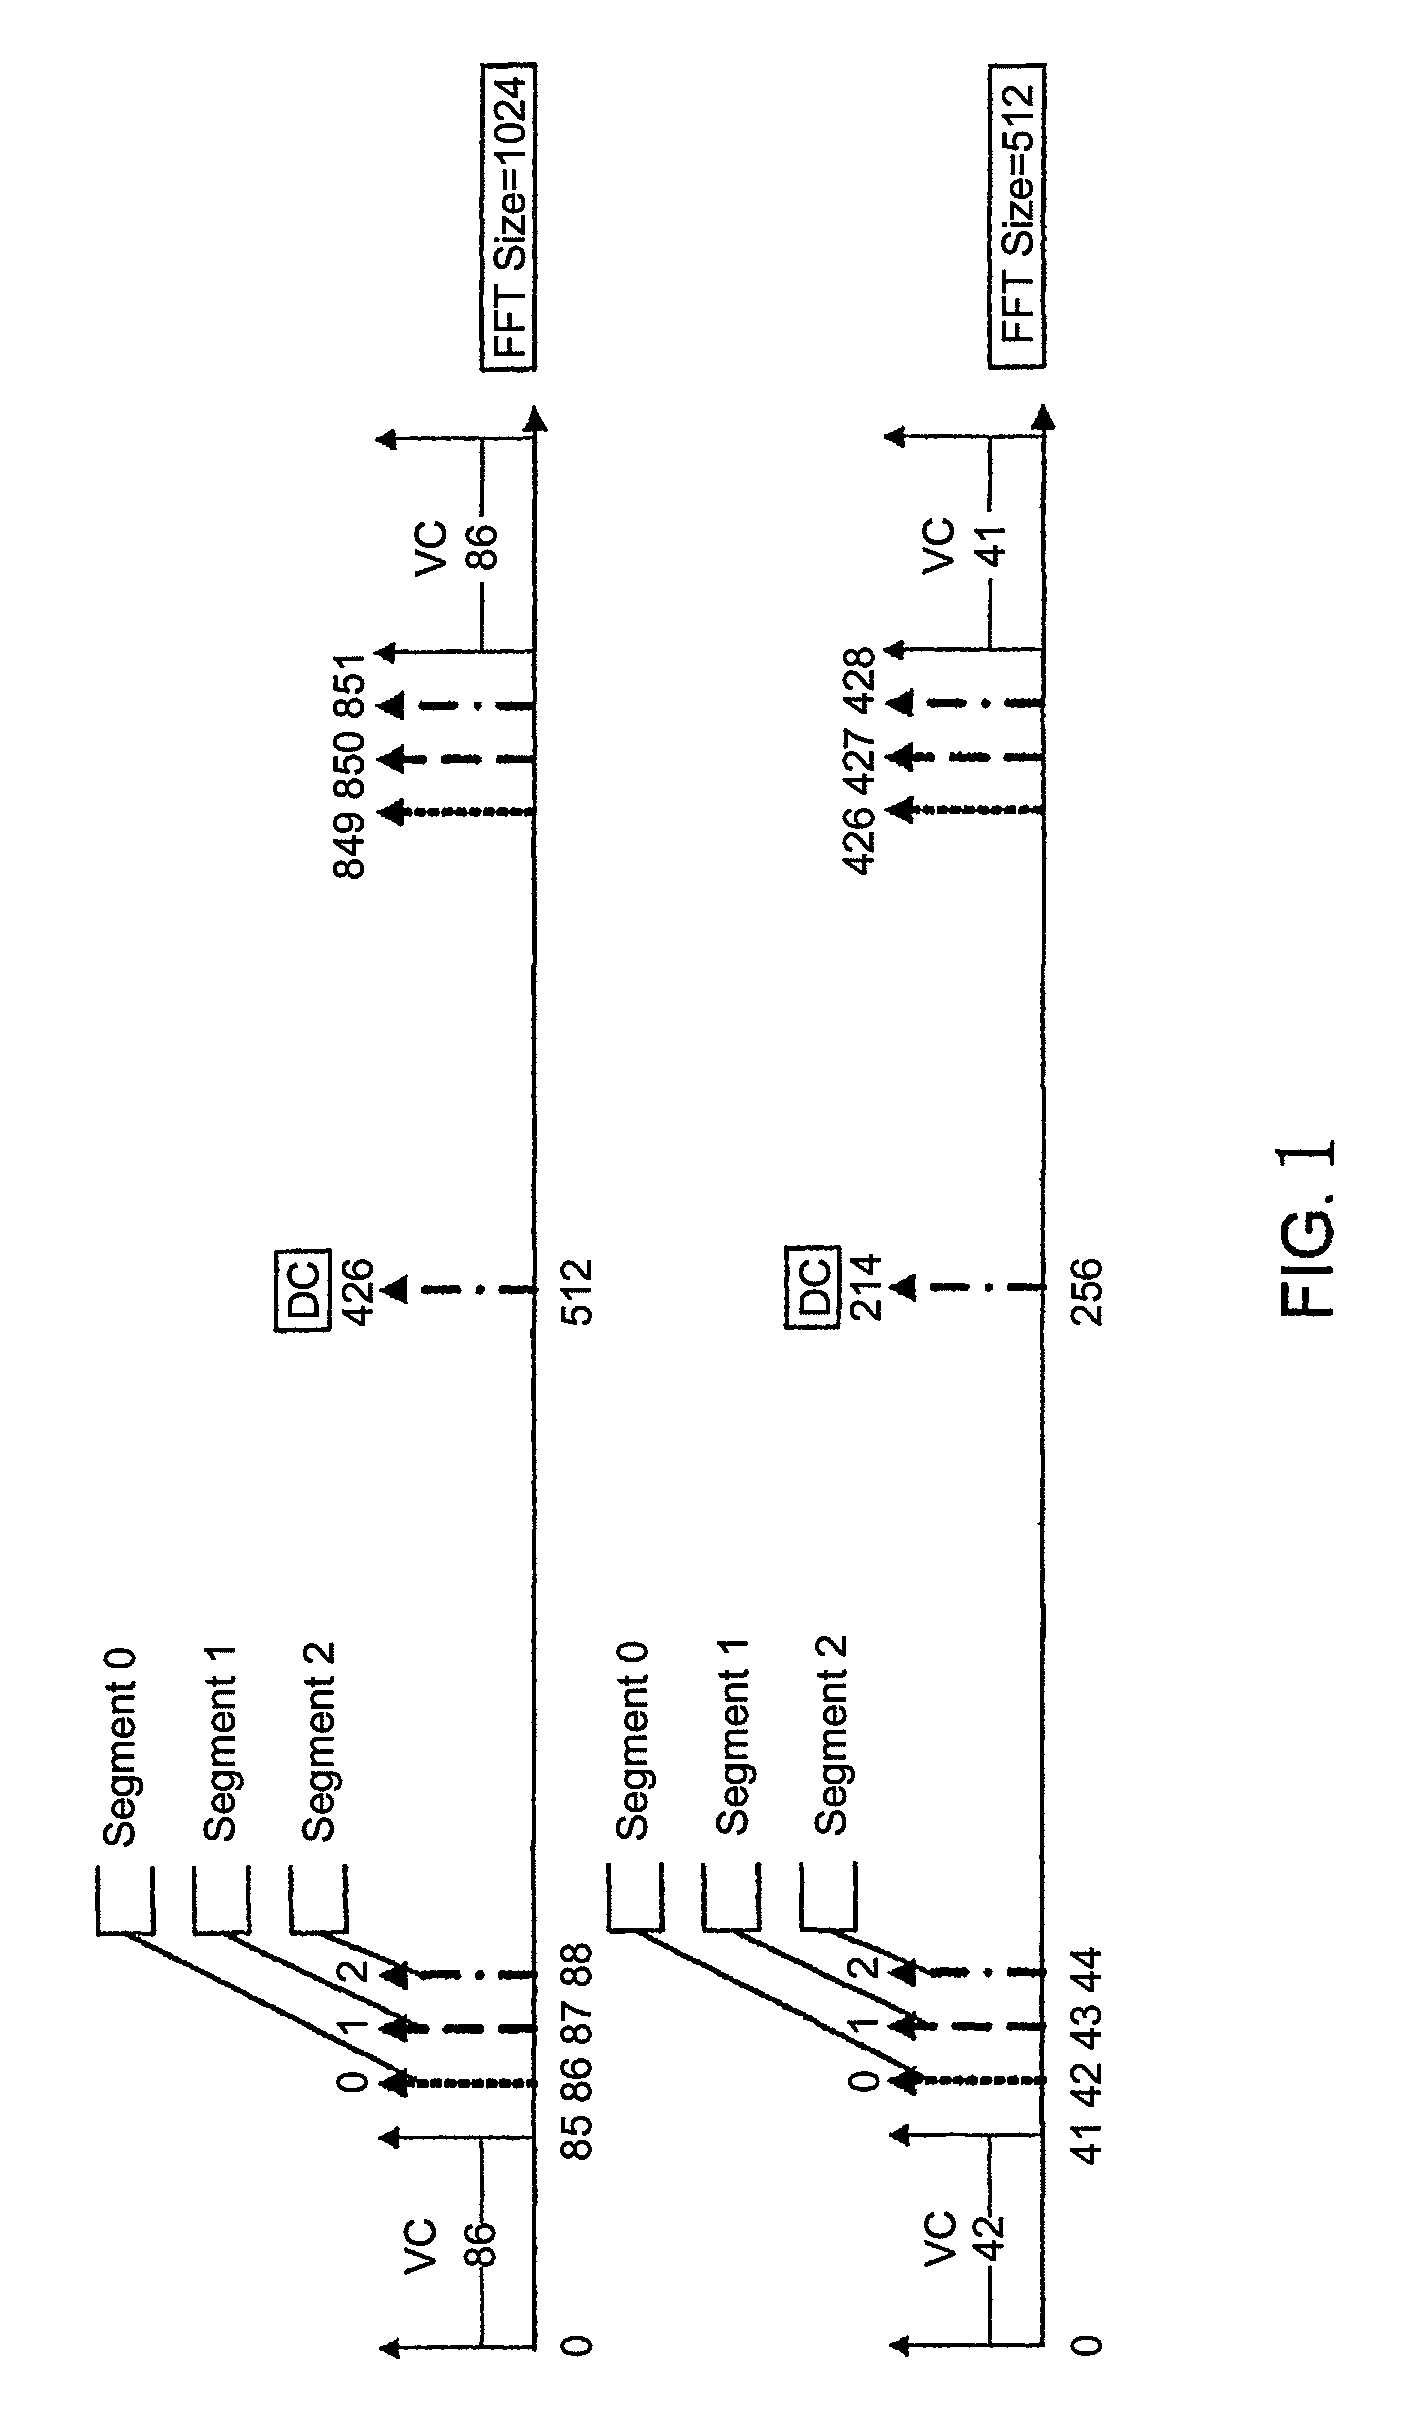 Apparatus and method for preamble detection and integer carrier frequency offset estimation